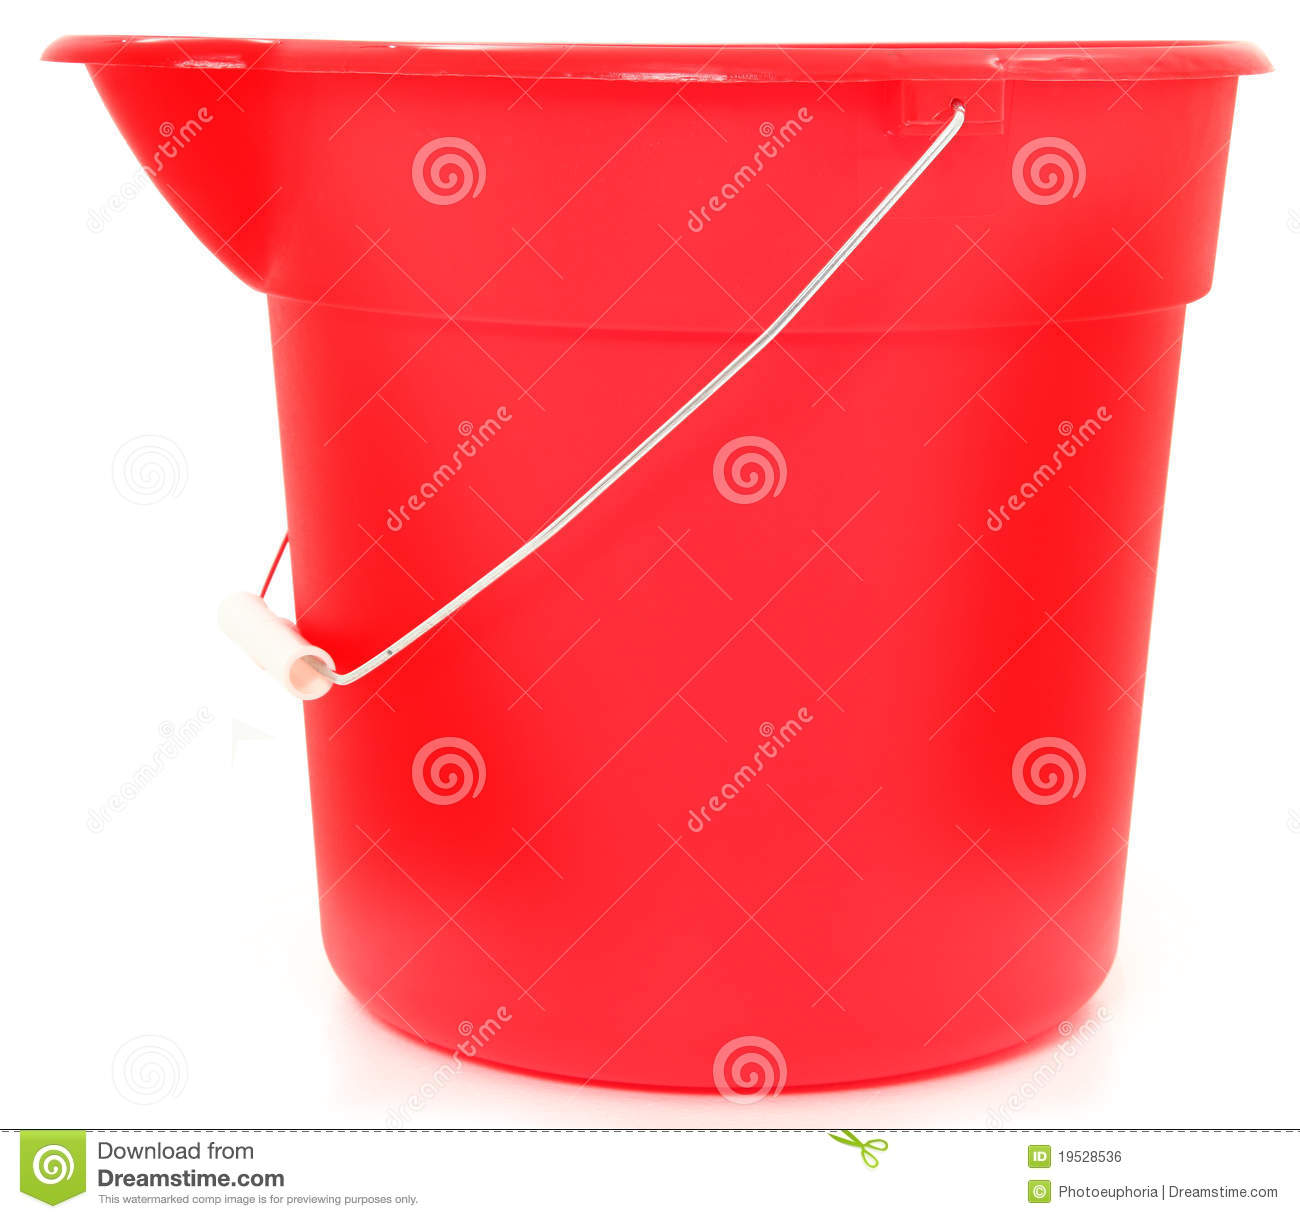 Empty Red Bucket Royalty Free Stock Image   Image  19528536